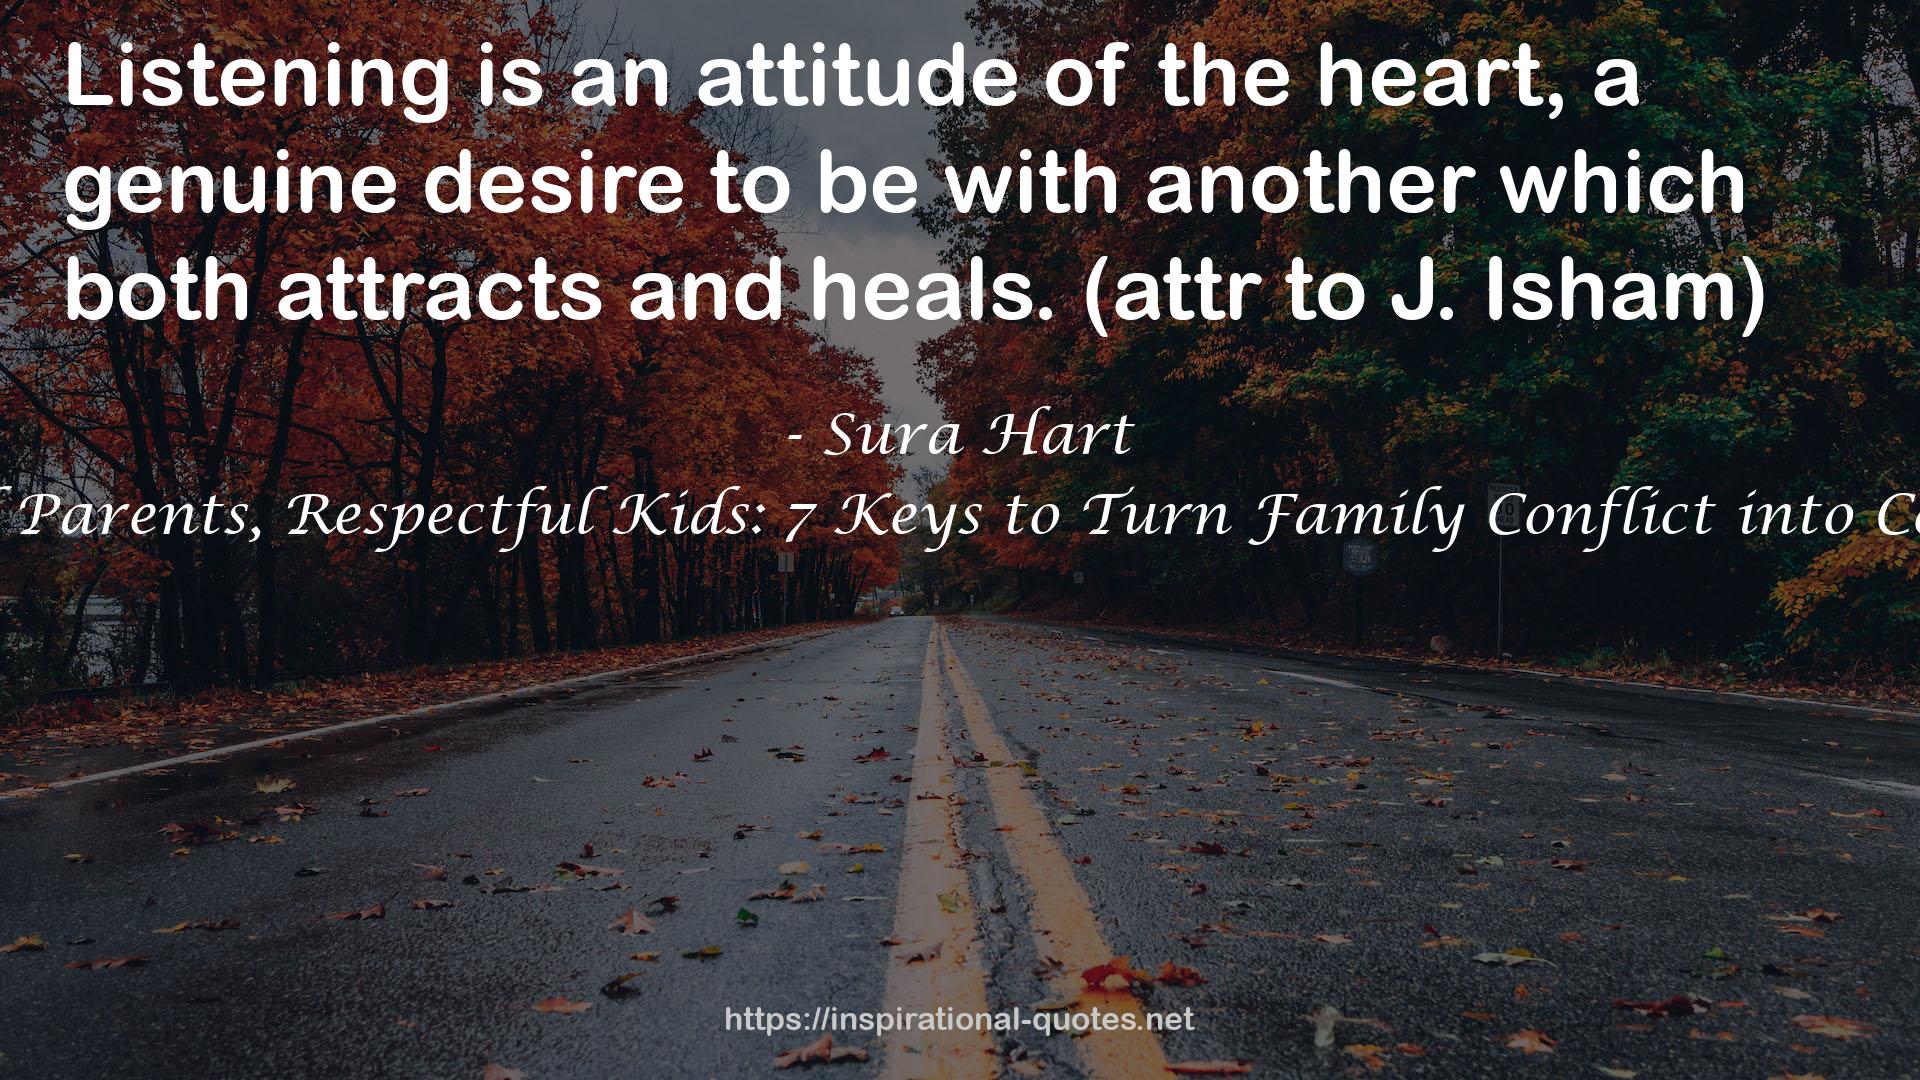 Respectful Parents, Respectful Kids: 7 Keys to Turn Family Conflict into Cooperation QUOTES